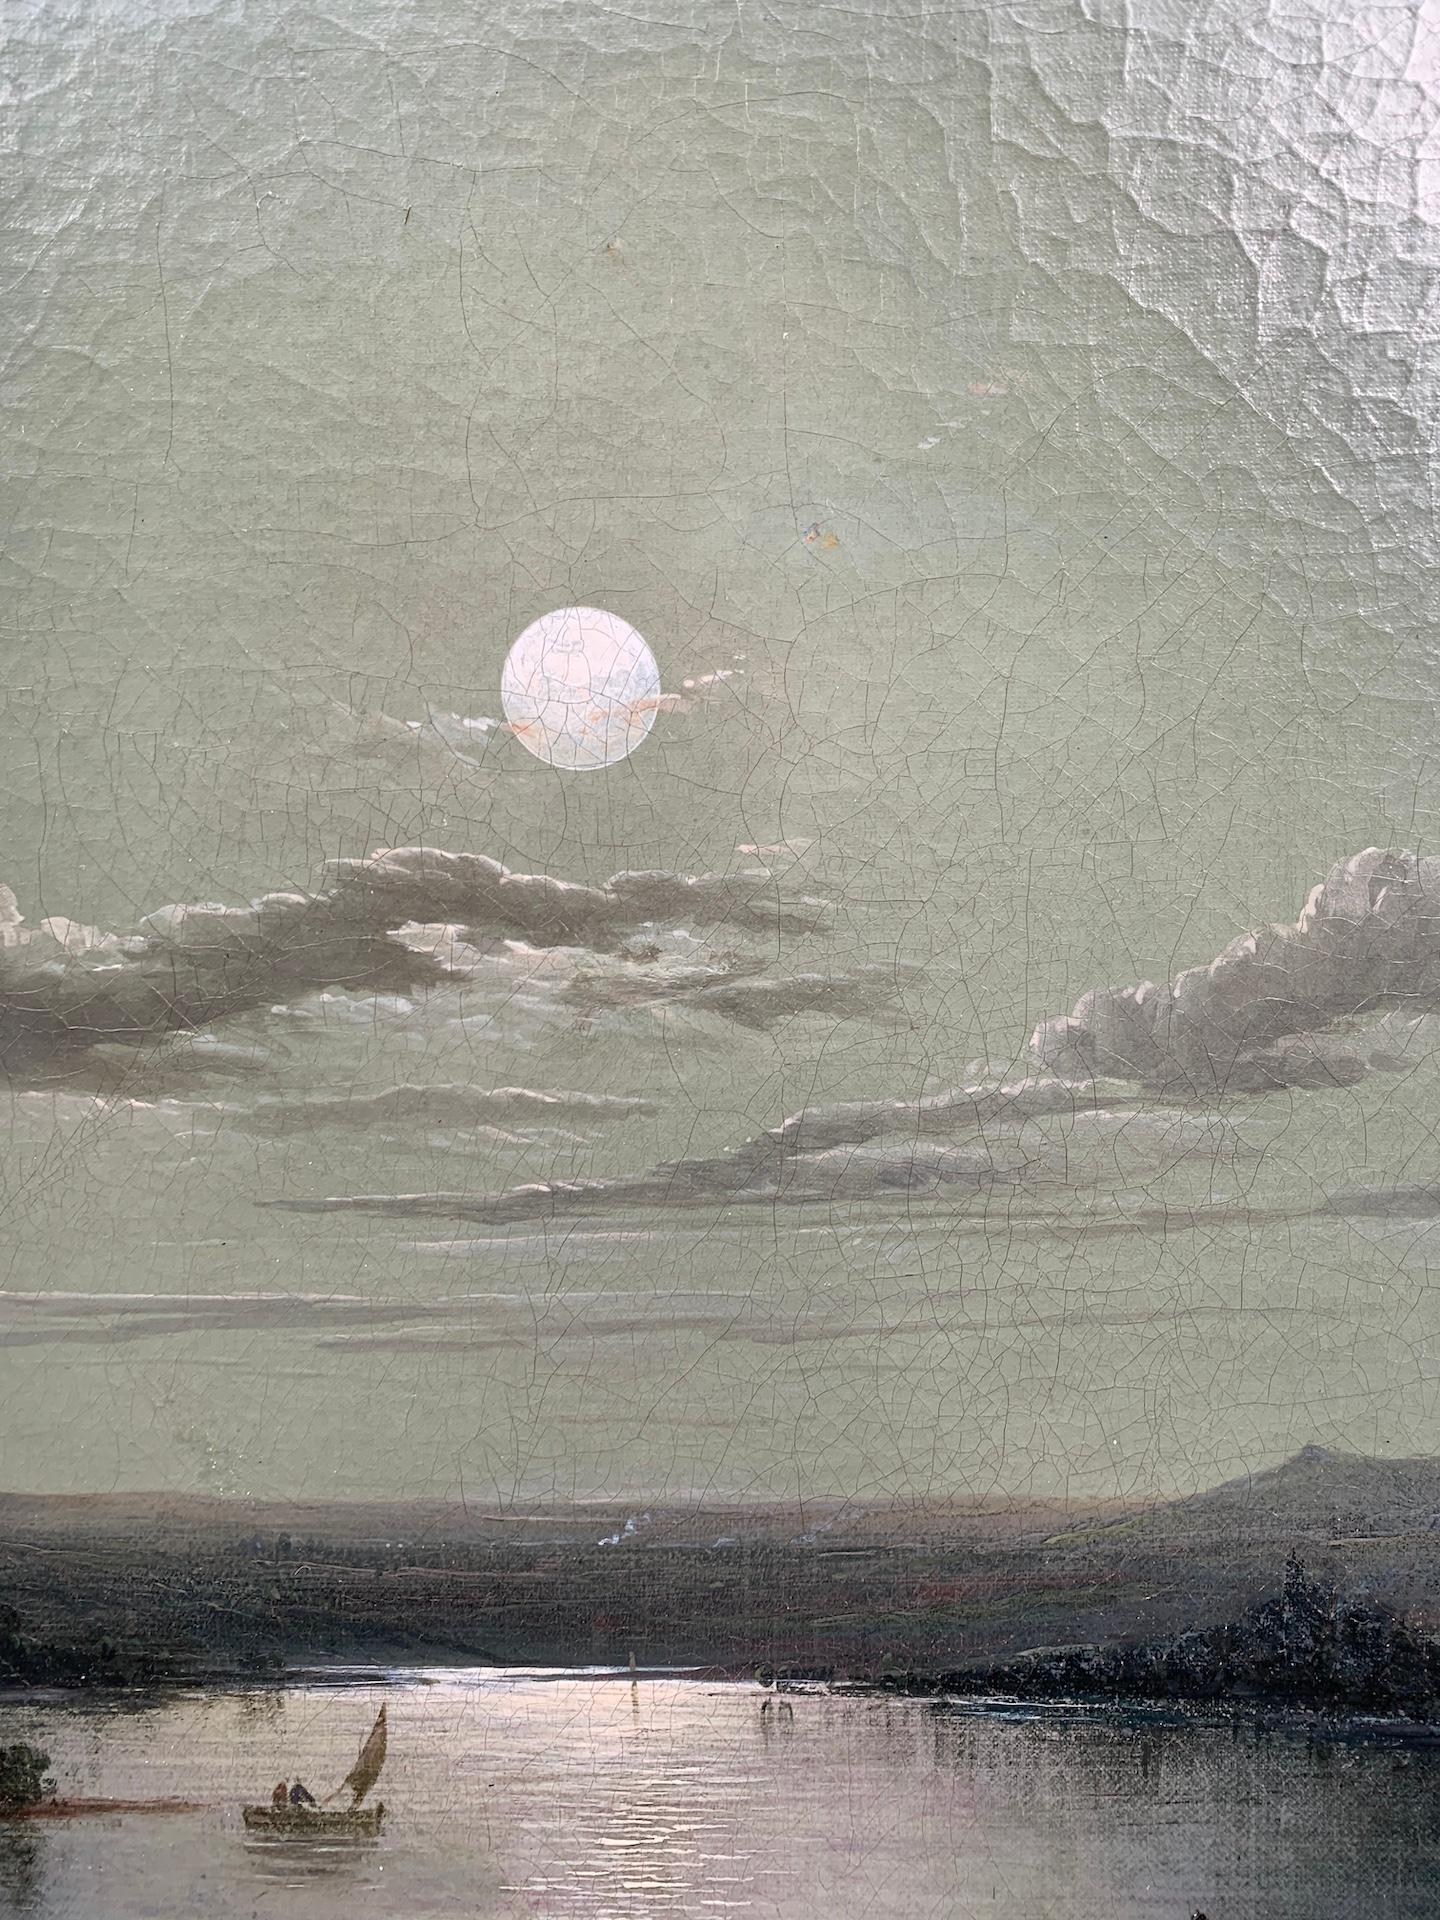 Late 18th century Antique English Moonlight over a lake and church landscape - Gray Landscape Painting by Henry Pether